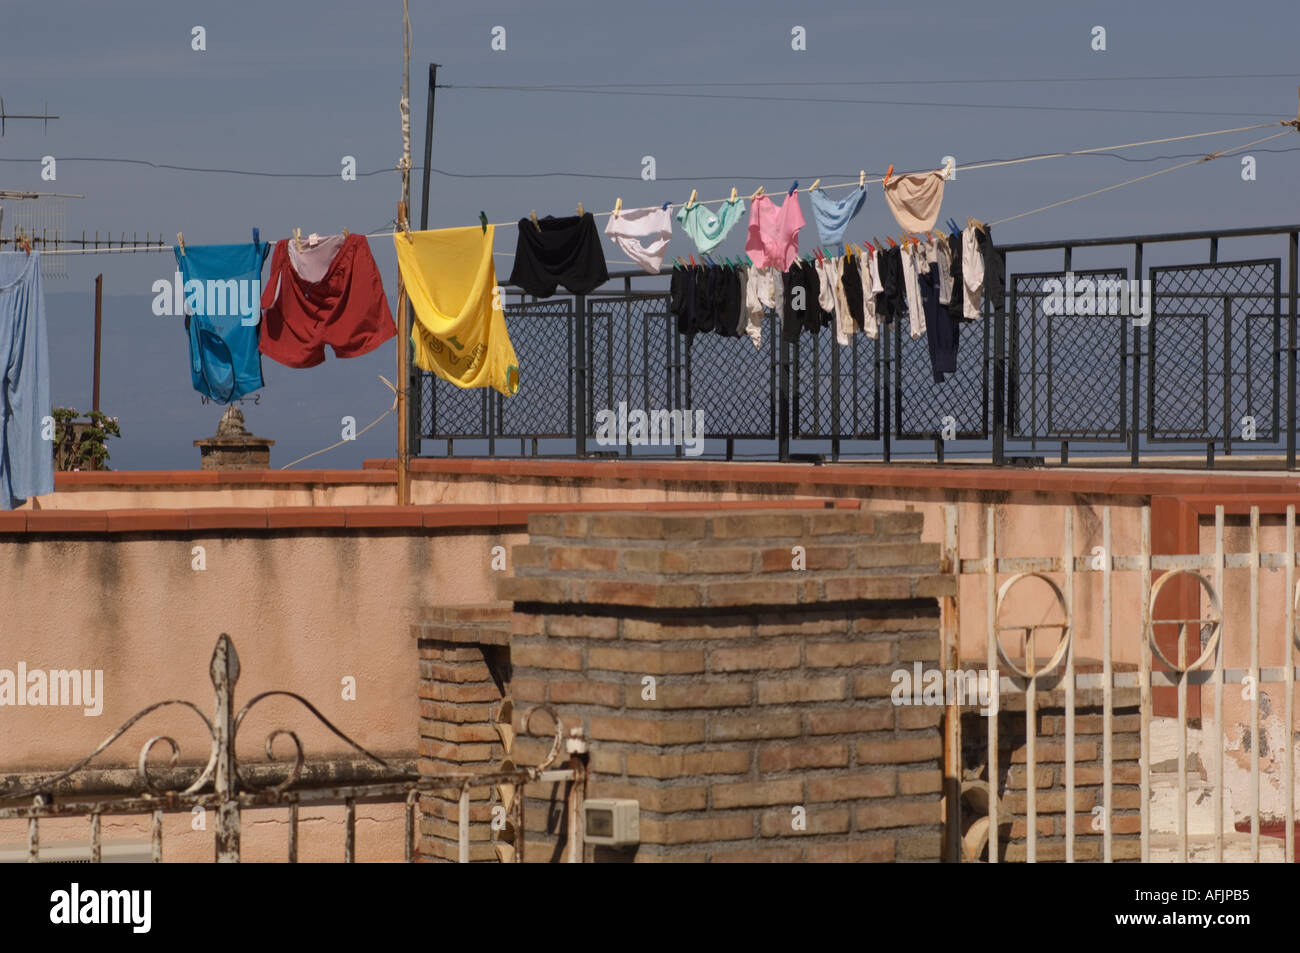 colorful laundry hanging on a clothes line over some stucco and brick walls and wrought iron fences with blue sky and sea behind Stock Photo